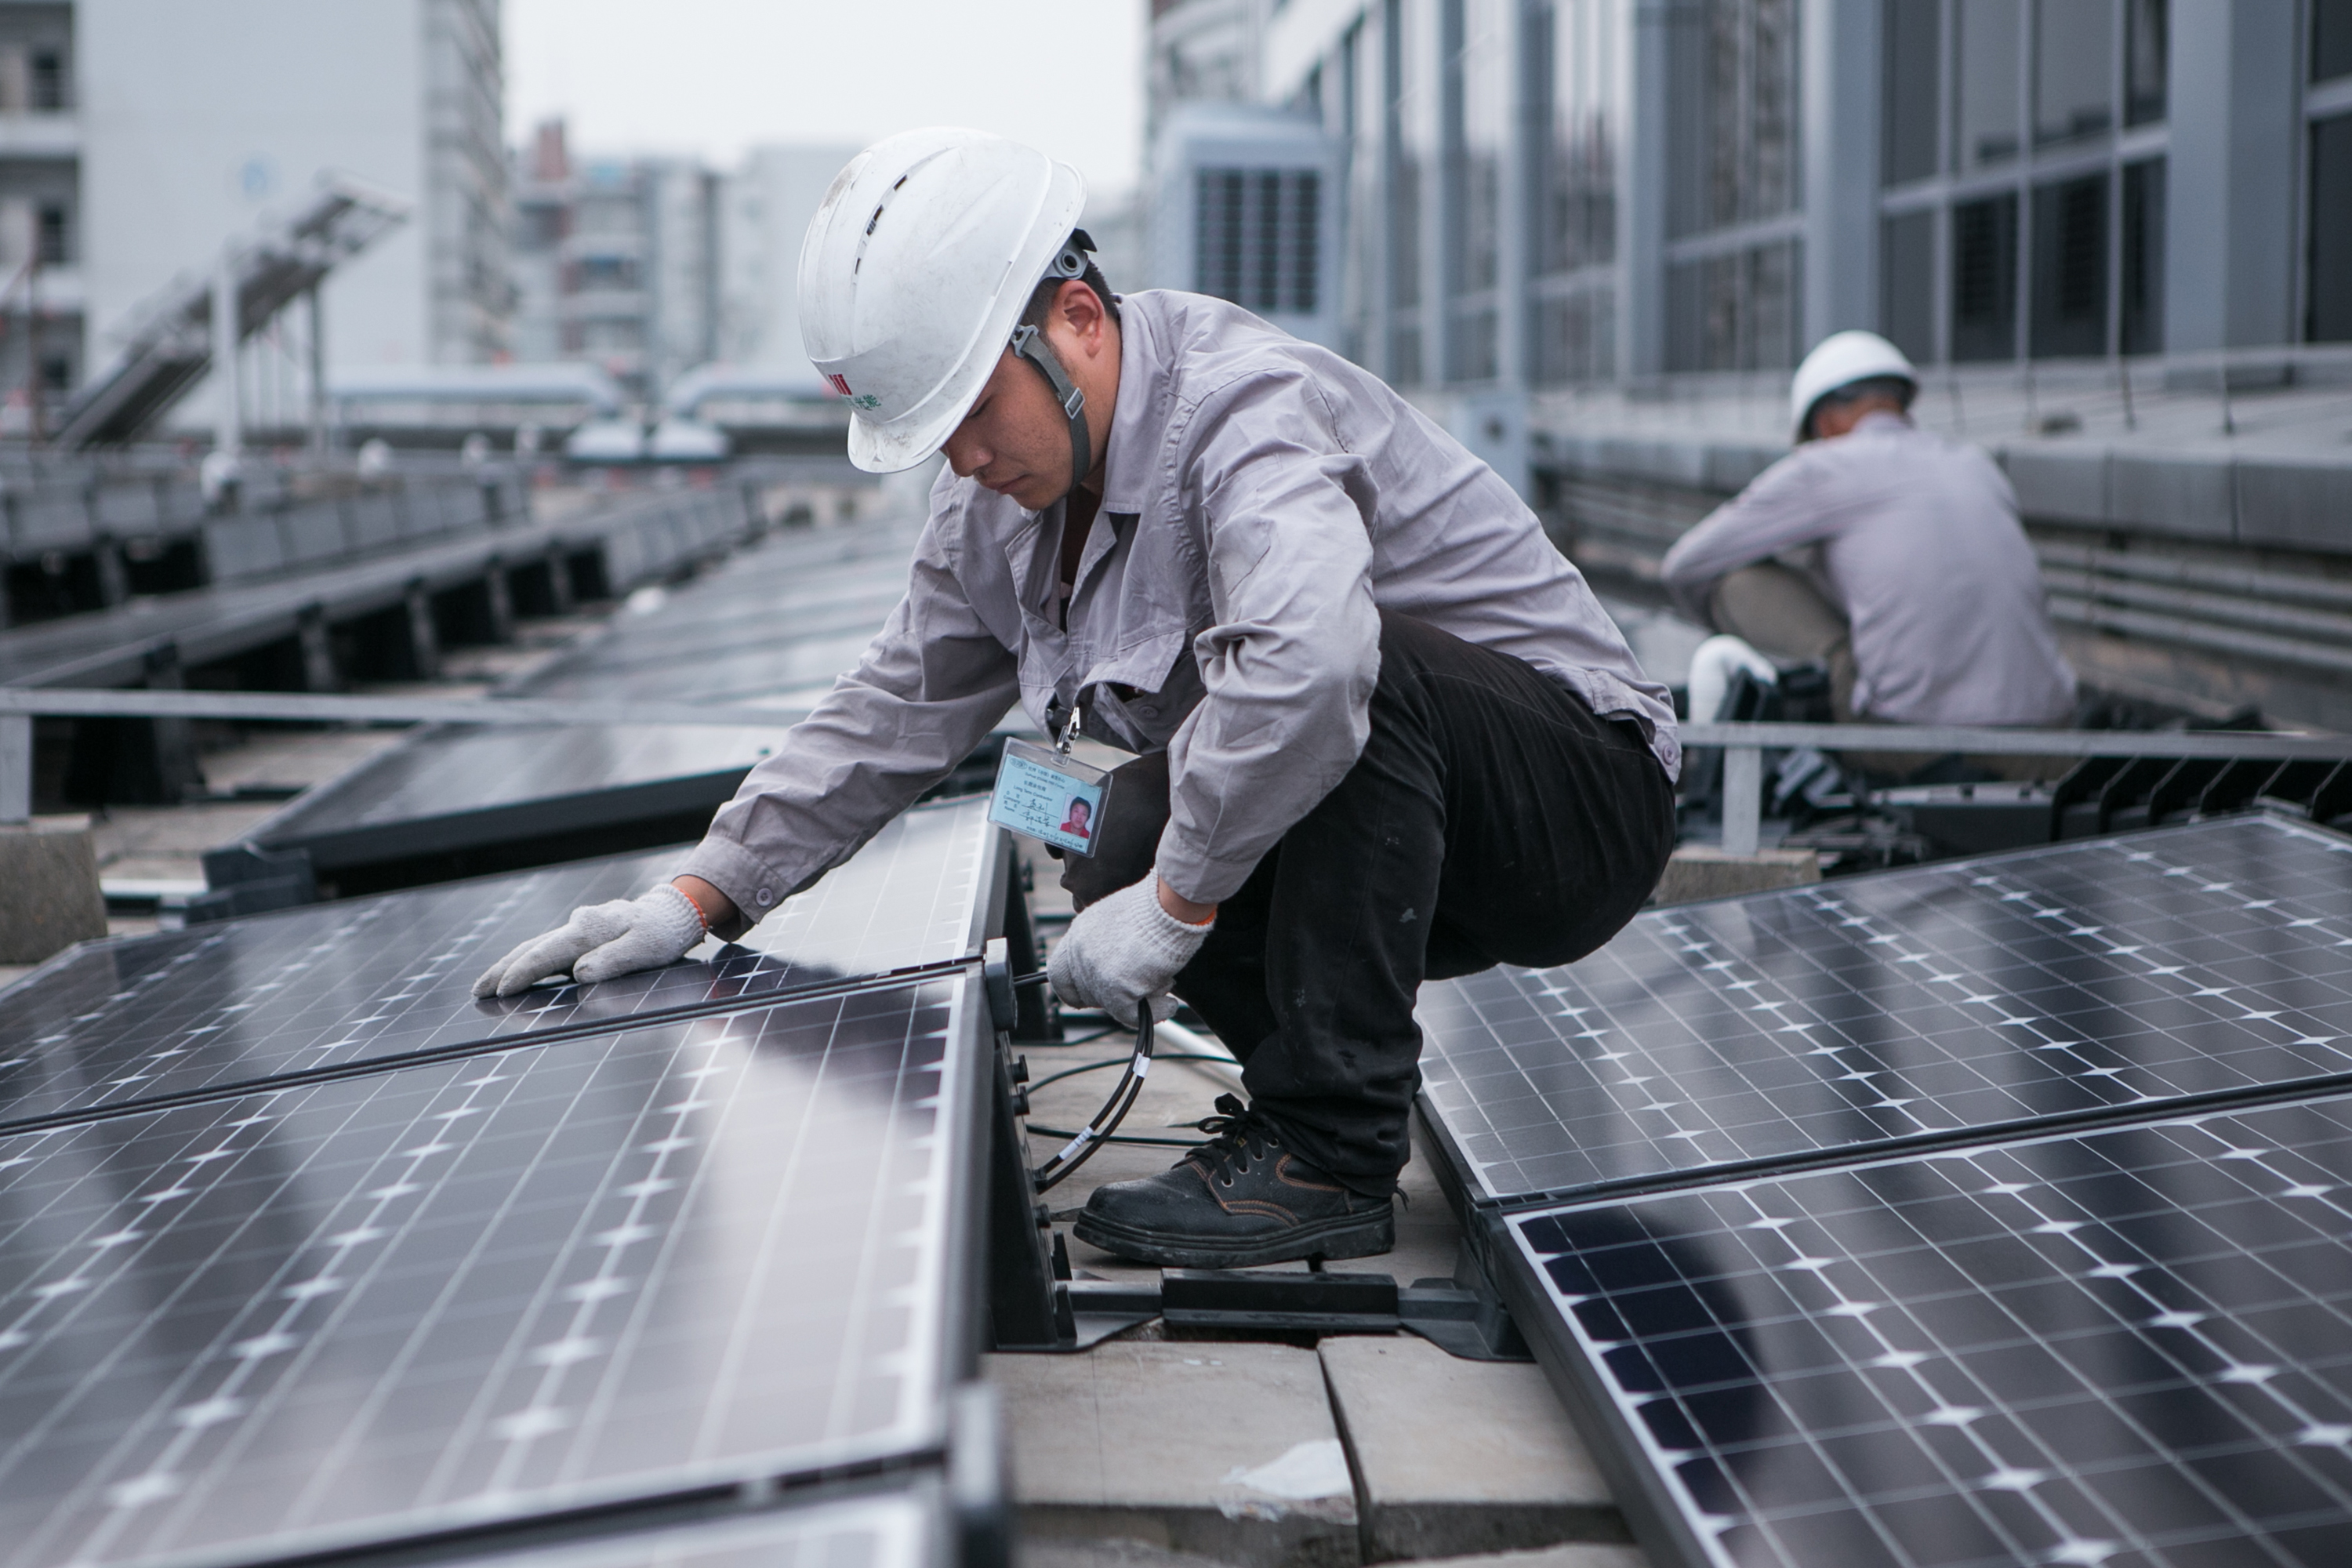 DuPont Photovoltaic Solutions and Yingli Solar Collaborate on China